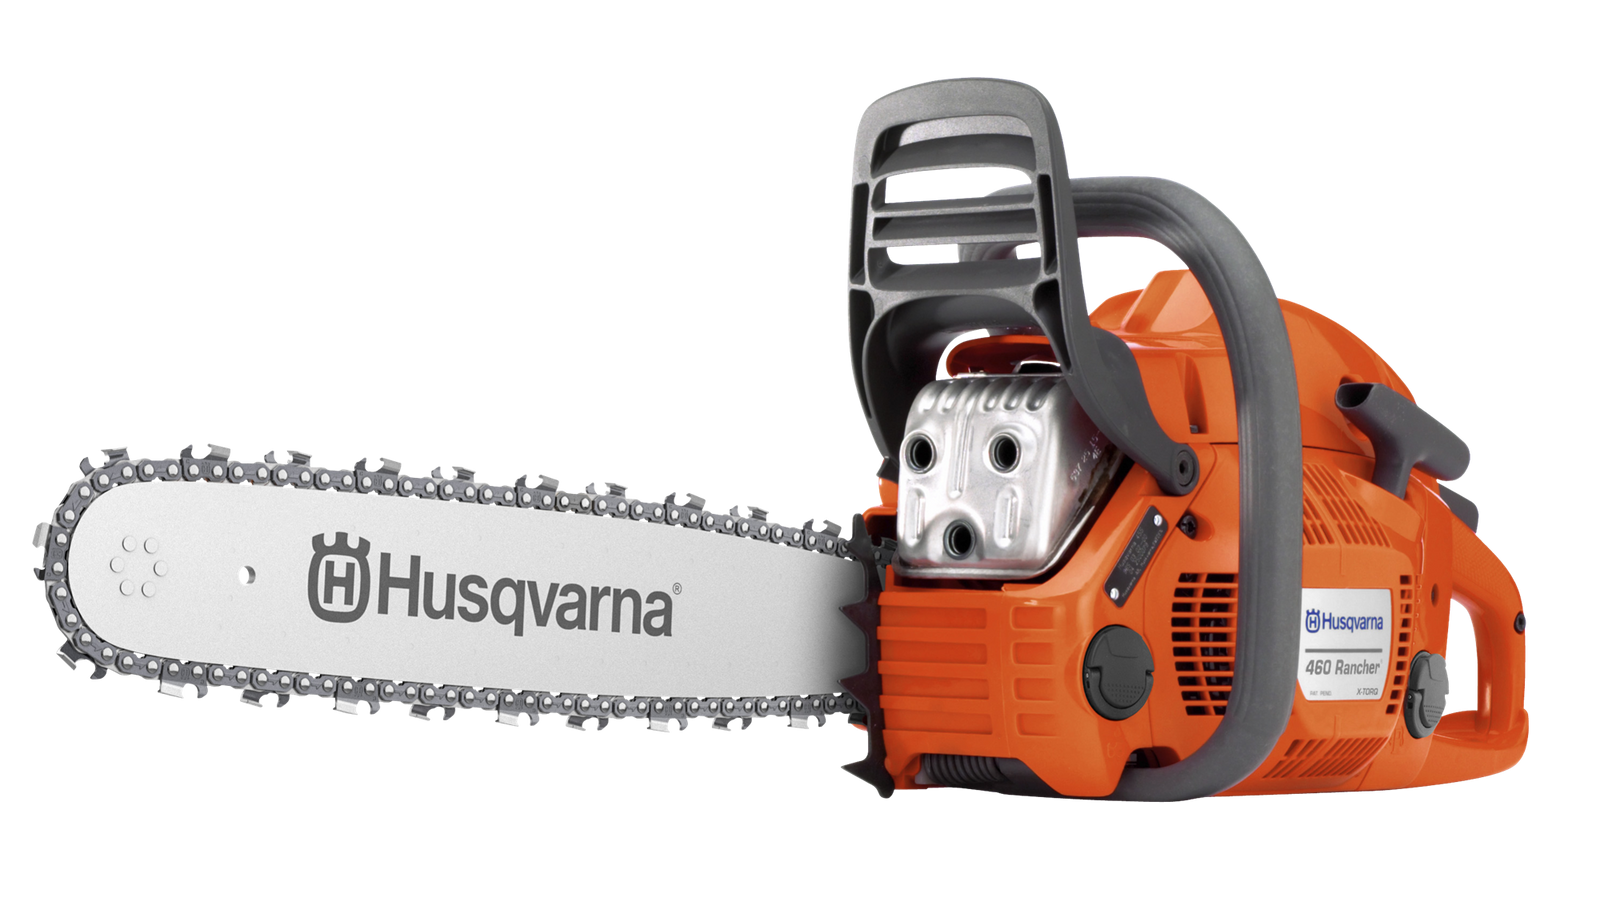  Husqvarna 460 Rancher Gas Chainsaw, 60.3-cc 3.6-HP, 2-Cycle  X-Torq Engine, 24 Inch Chainsaw with Automatic Adjustable Oil Pump, For  Wood Cutting, Tree Trimming and Land Clearing : Patio, Lawn & Garden